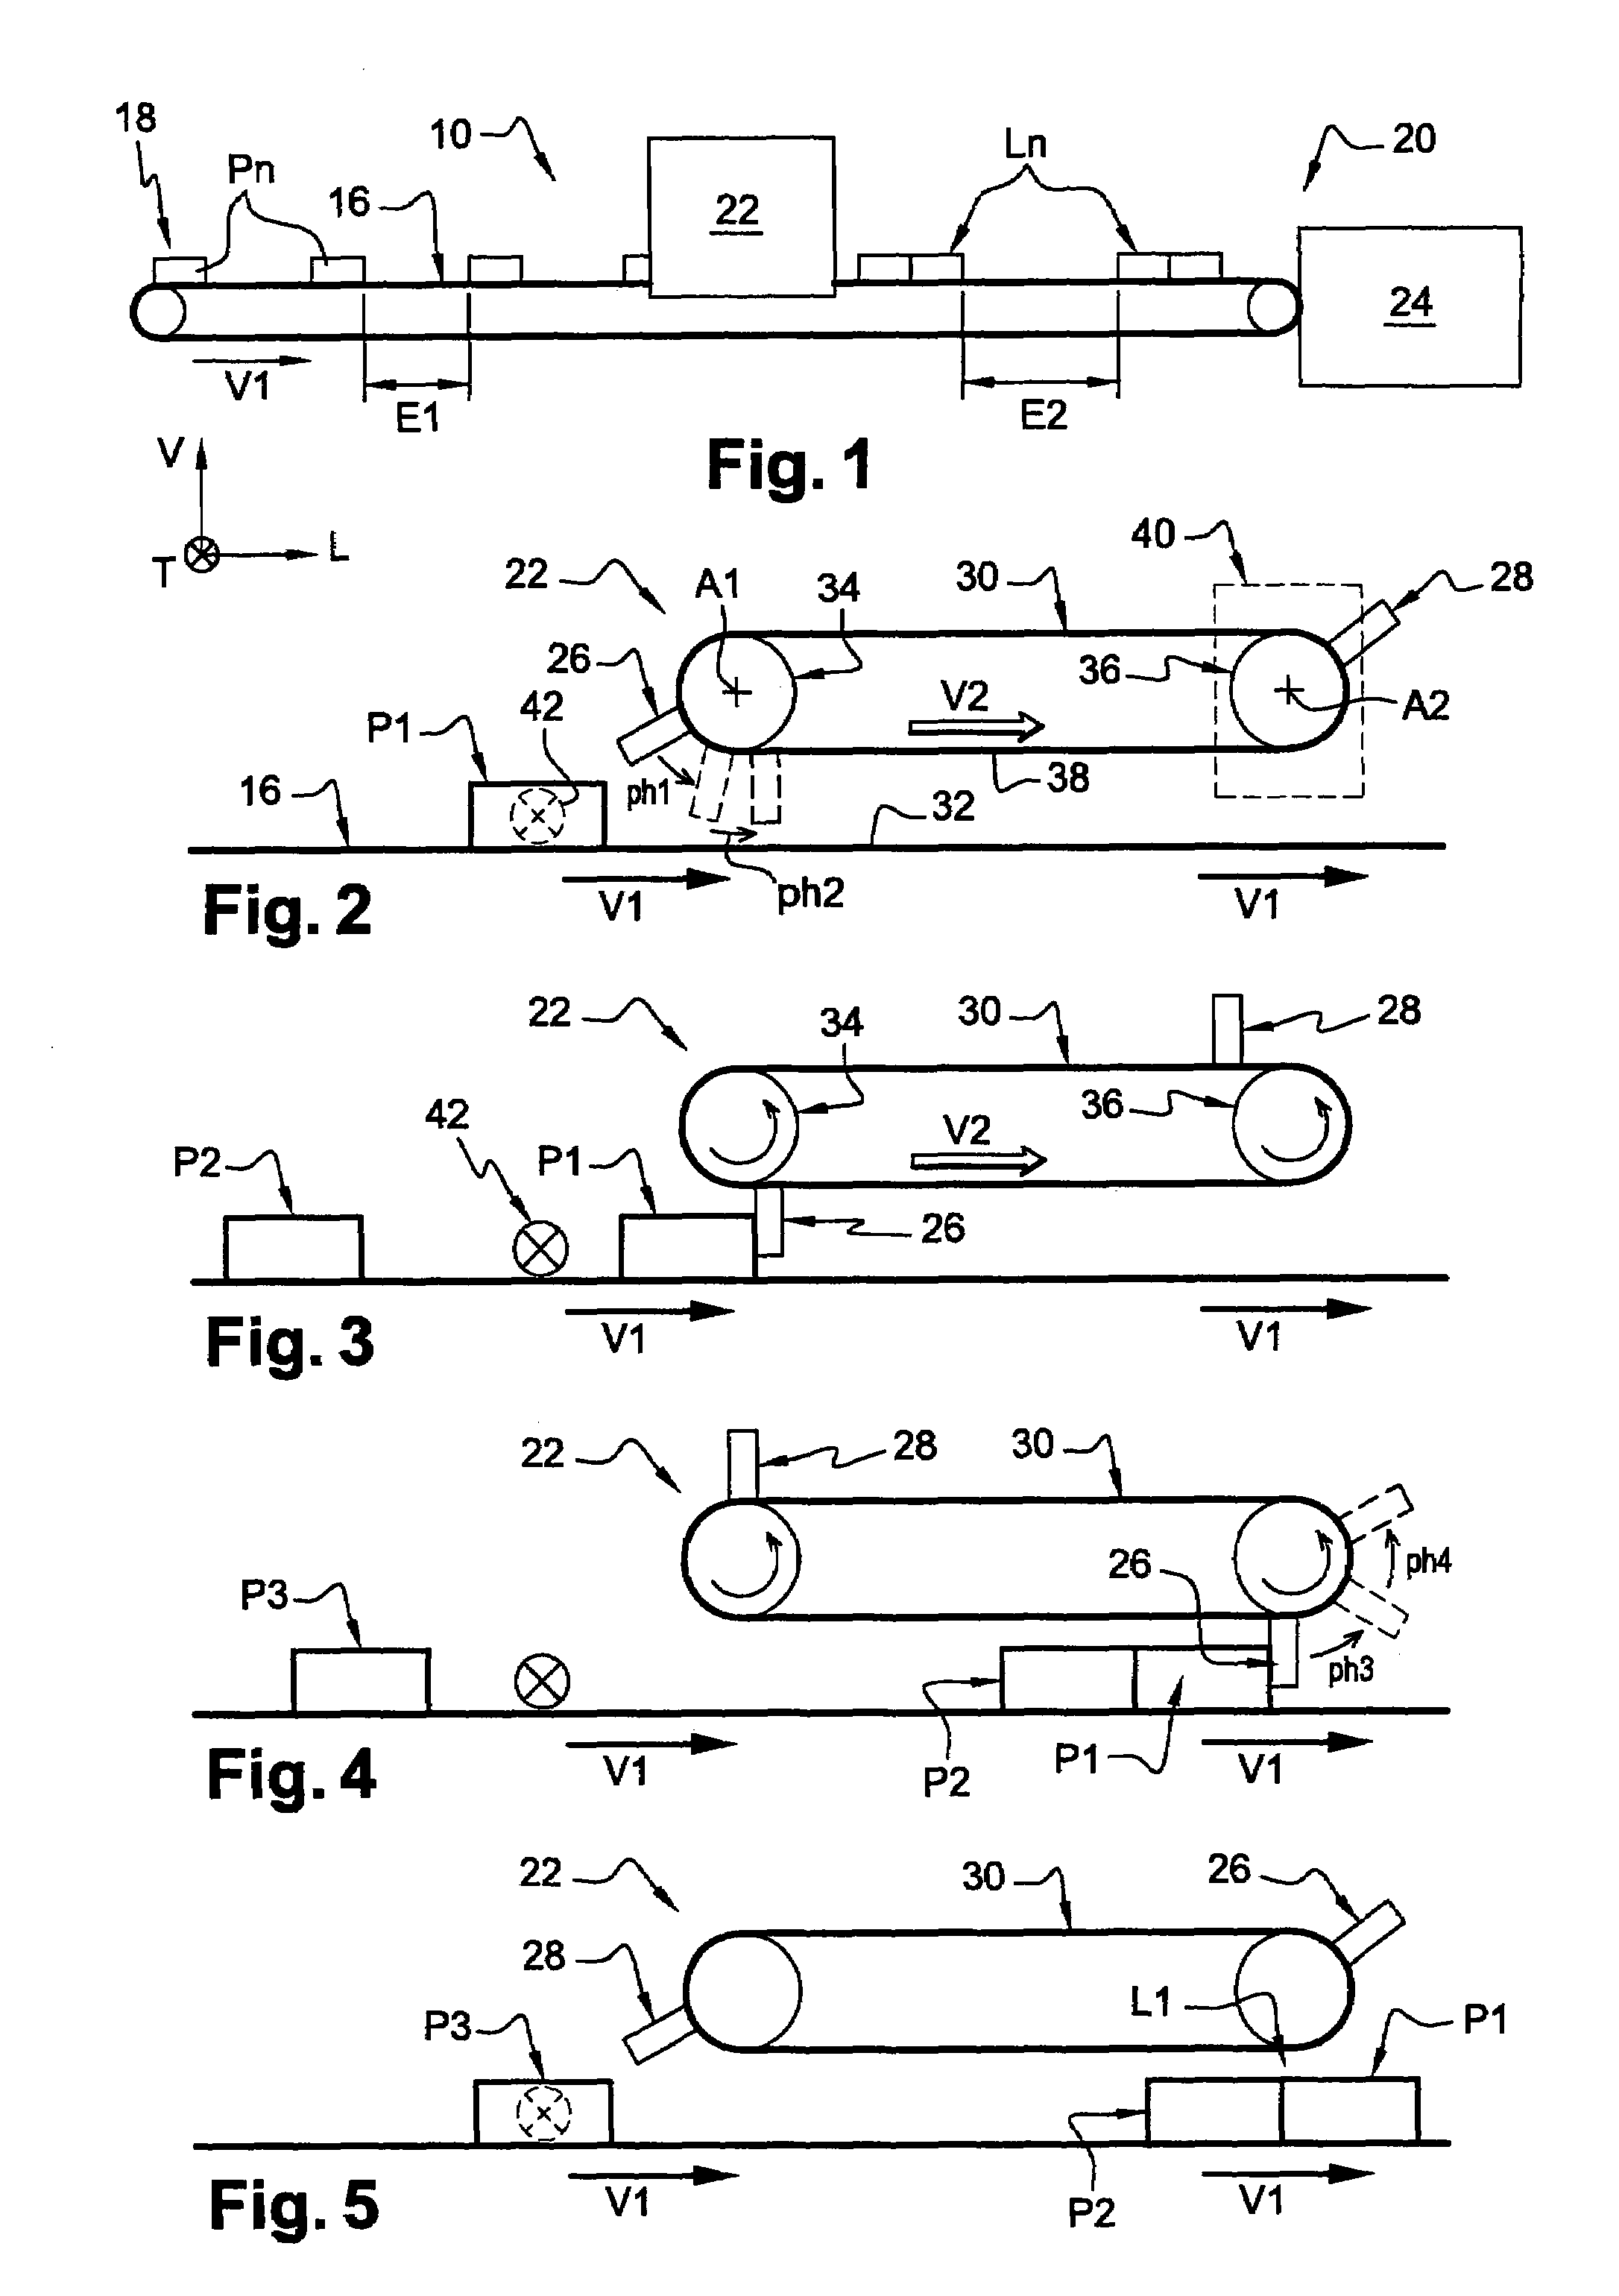 Arrangement for assembling products in batches on high-speed conveyor belt